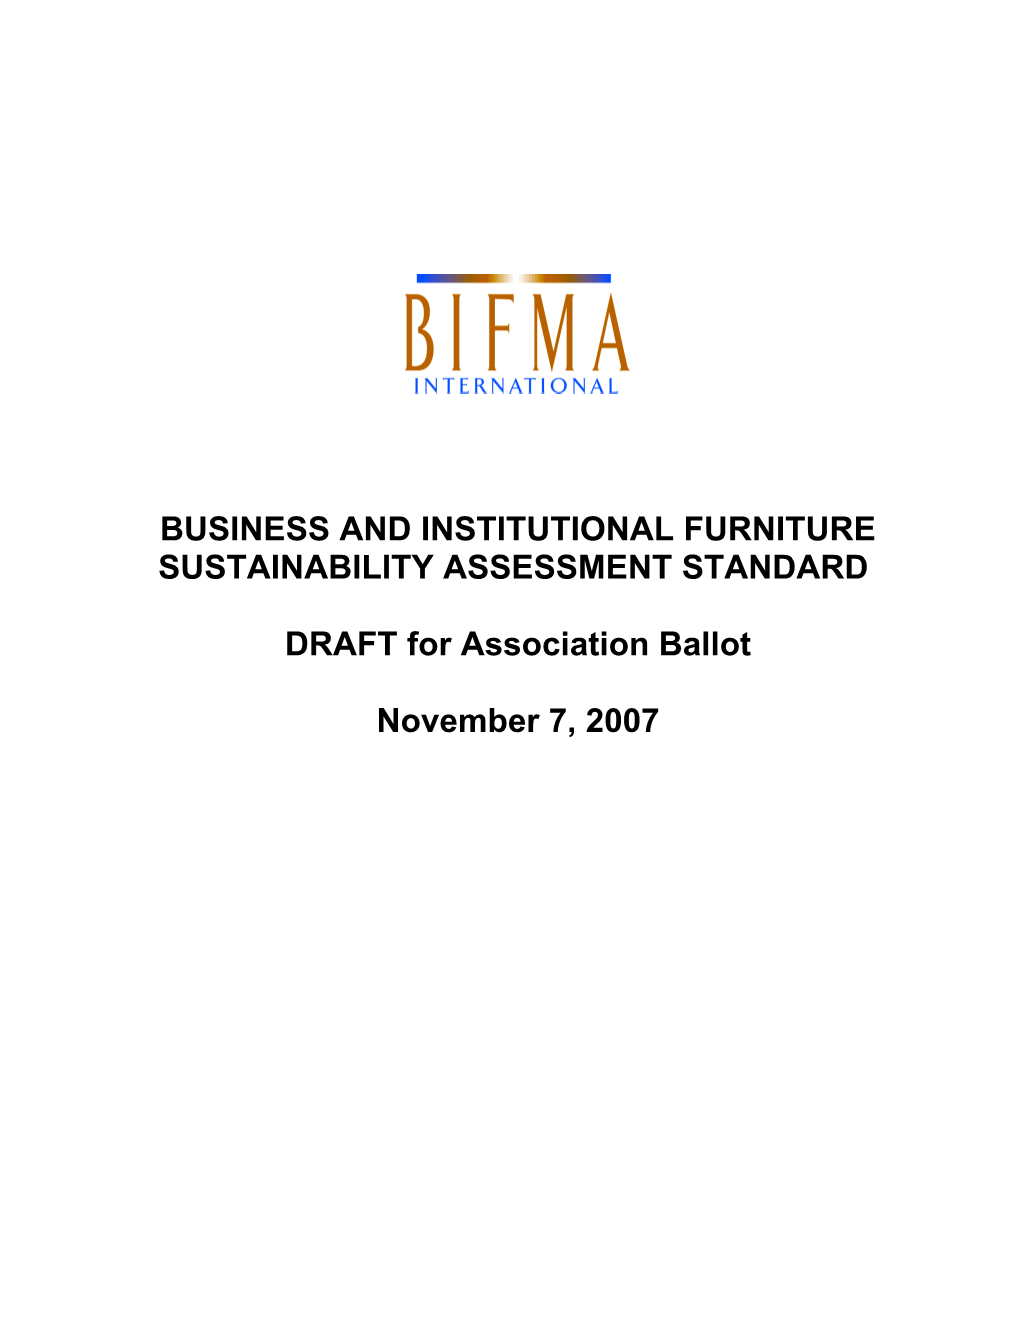 Business and Institutional Furniture Sustainability Assessment Standard